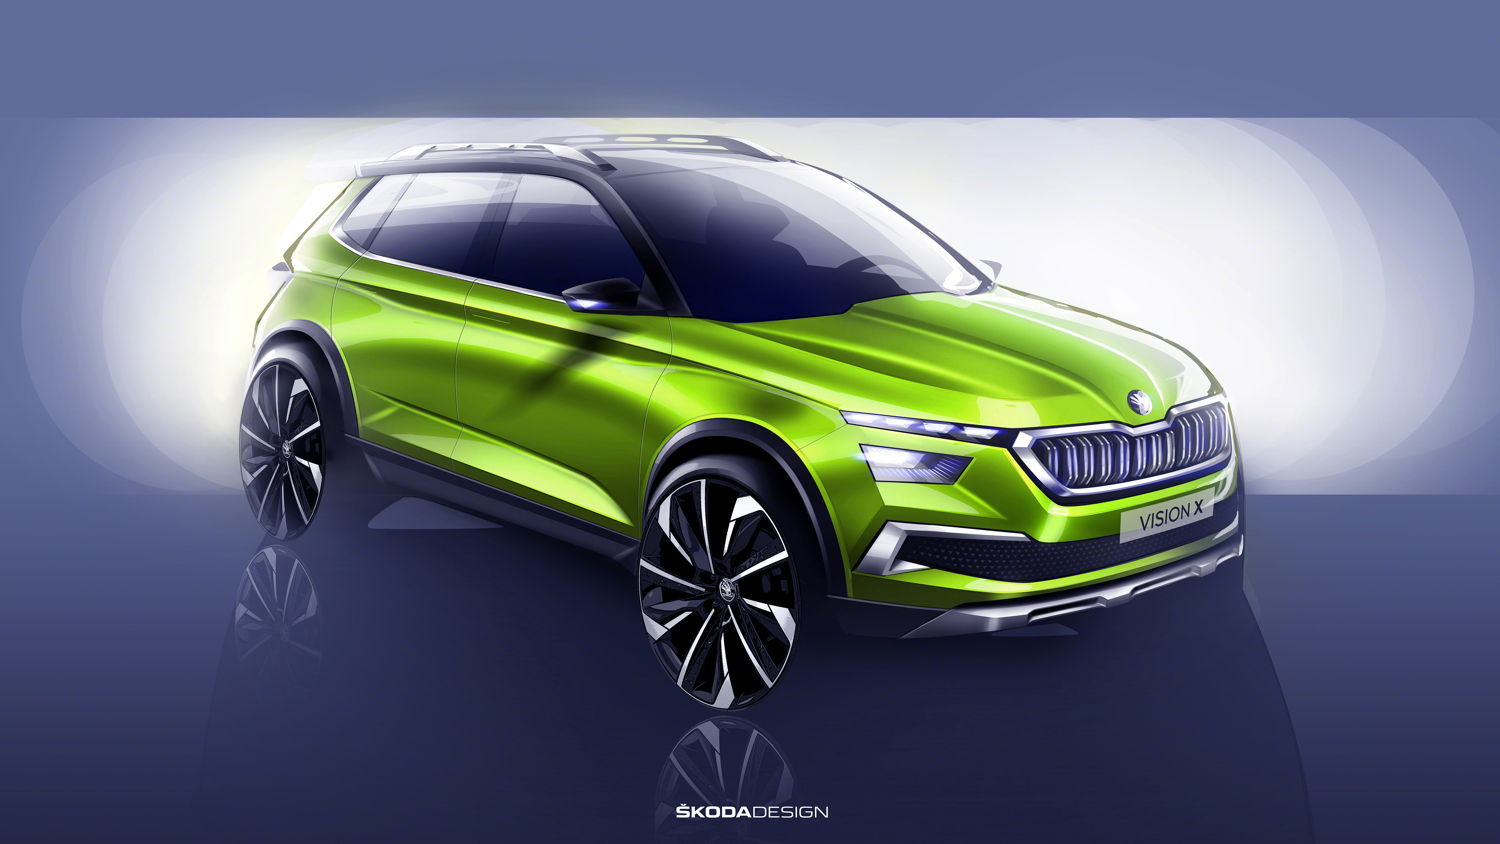 With the hybrid study ŠKODA VISION X, the Czech car manufacturer gives an outlook on the further development of their model range. The urban crossover concept transfers the characteristic features of the successful ŠKODA SUV models to another vehicle segment.